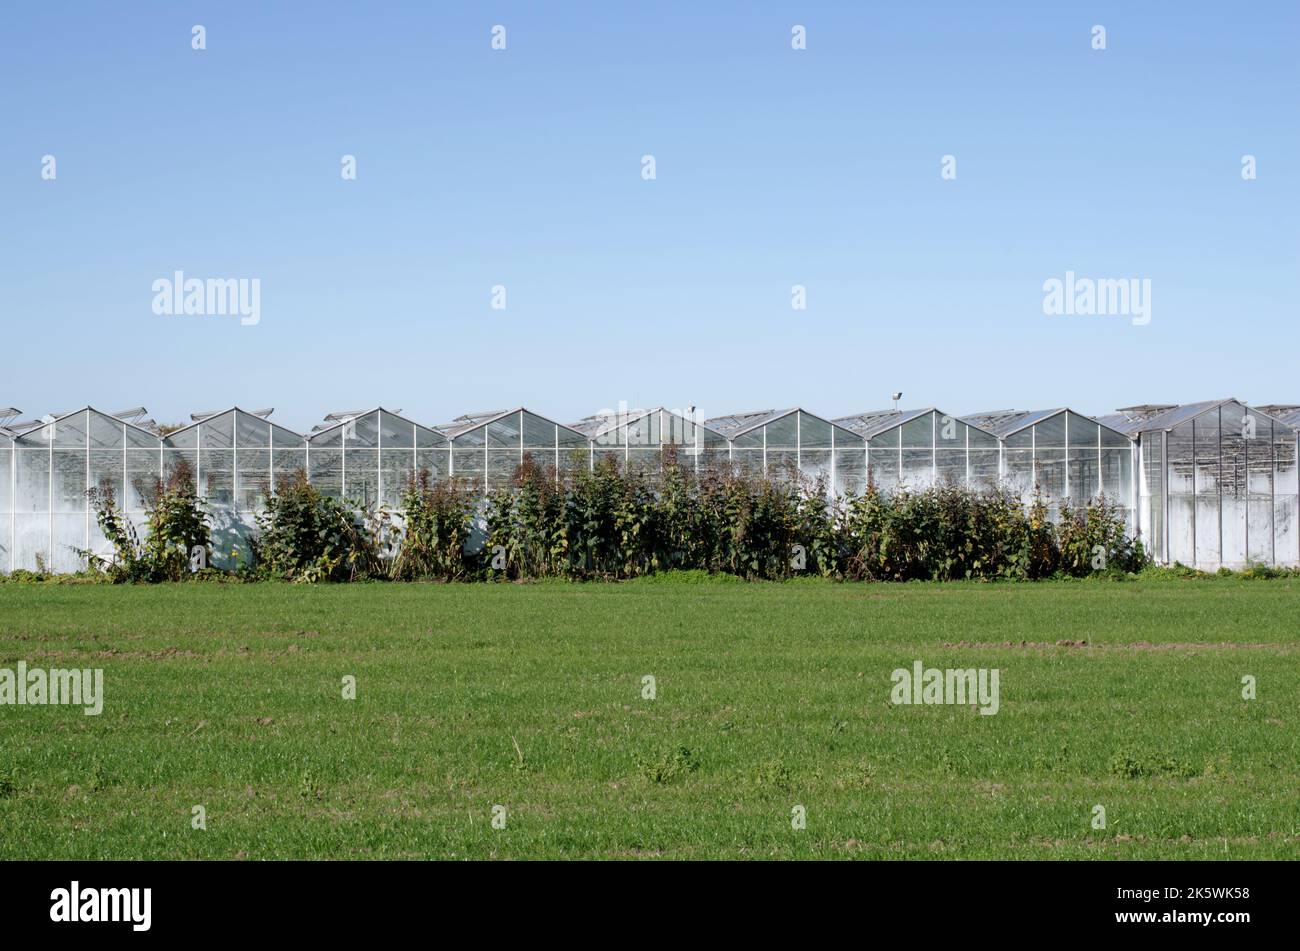 Agriculture, food production of vegetables: facade front of greenhouse for faster production at colder temperatures Stock Photo